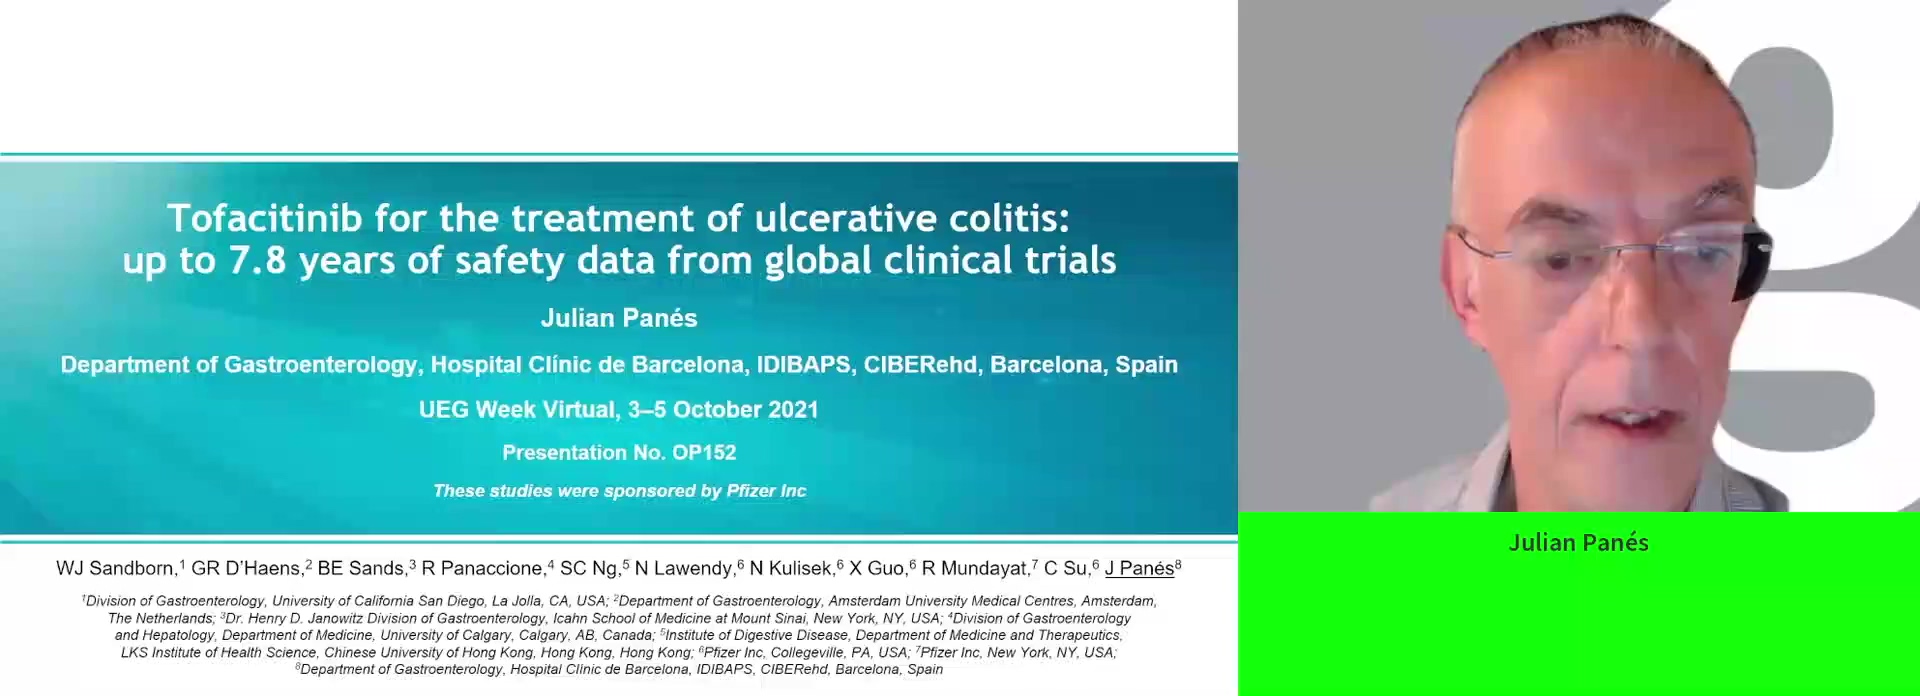 TOFACITINIB FOR THE TREATMENT OF ULCERATIVE COLITIS: UP TO 7.8 YEARS OF SAFETY DATA FROM GLOBAL CLINICAL TRIALS